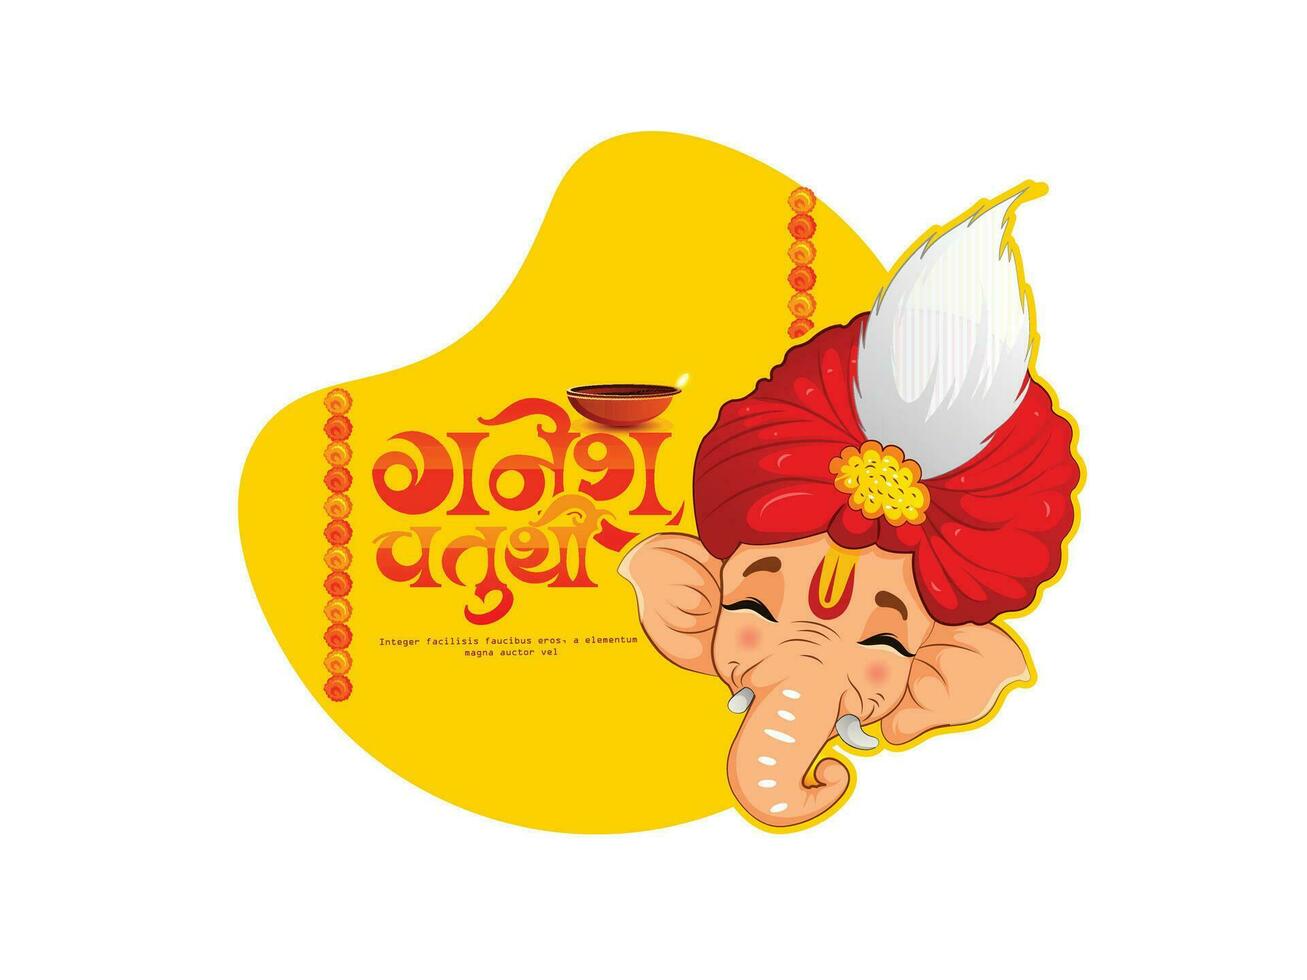 Ganesha Chaturthi' Hindi text and Ganesha illustration vector with background of Indian festival for banner, template, post and invitation card design